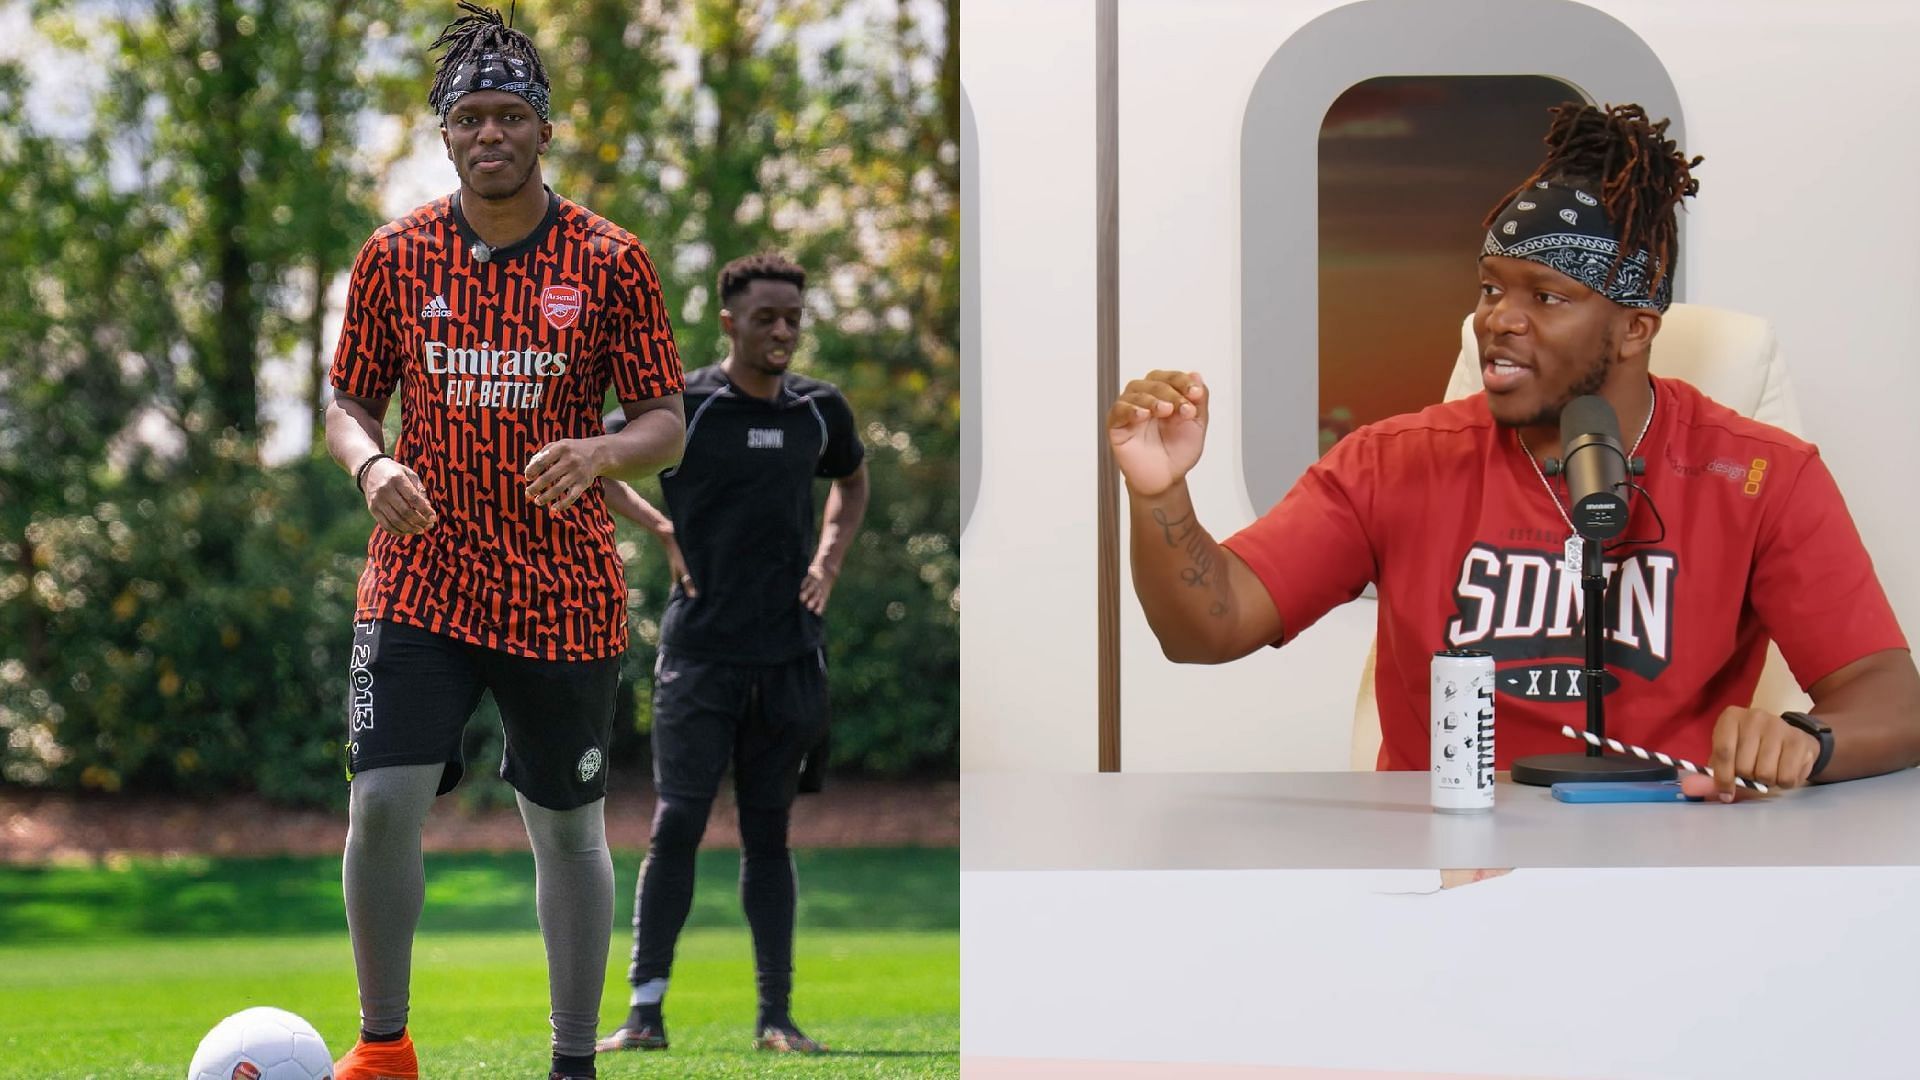 KSI reacts to Arsenal losing the Premier League title to Manchester City (image via KSI/Instagram, Side+/YouTube)